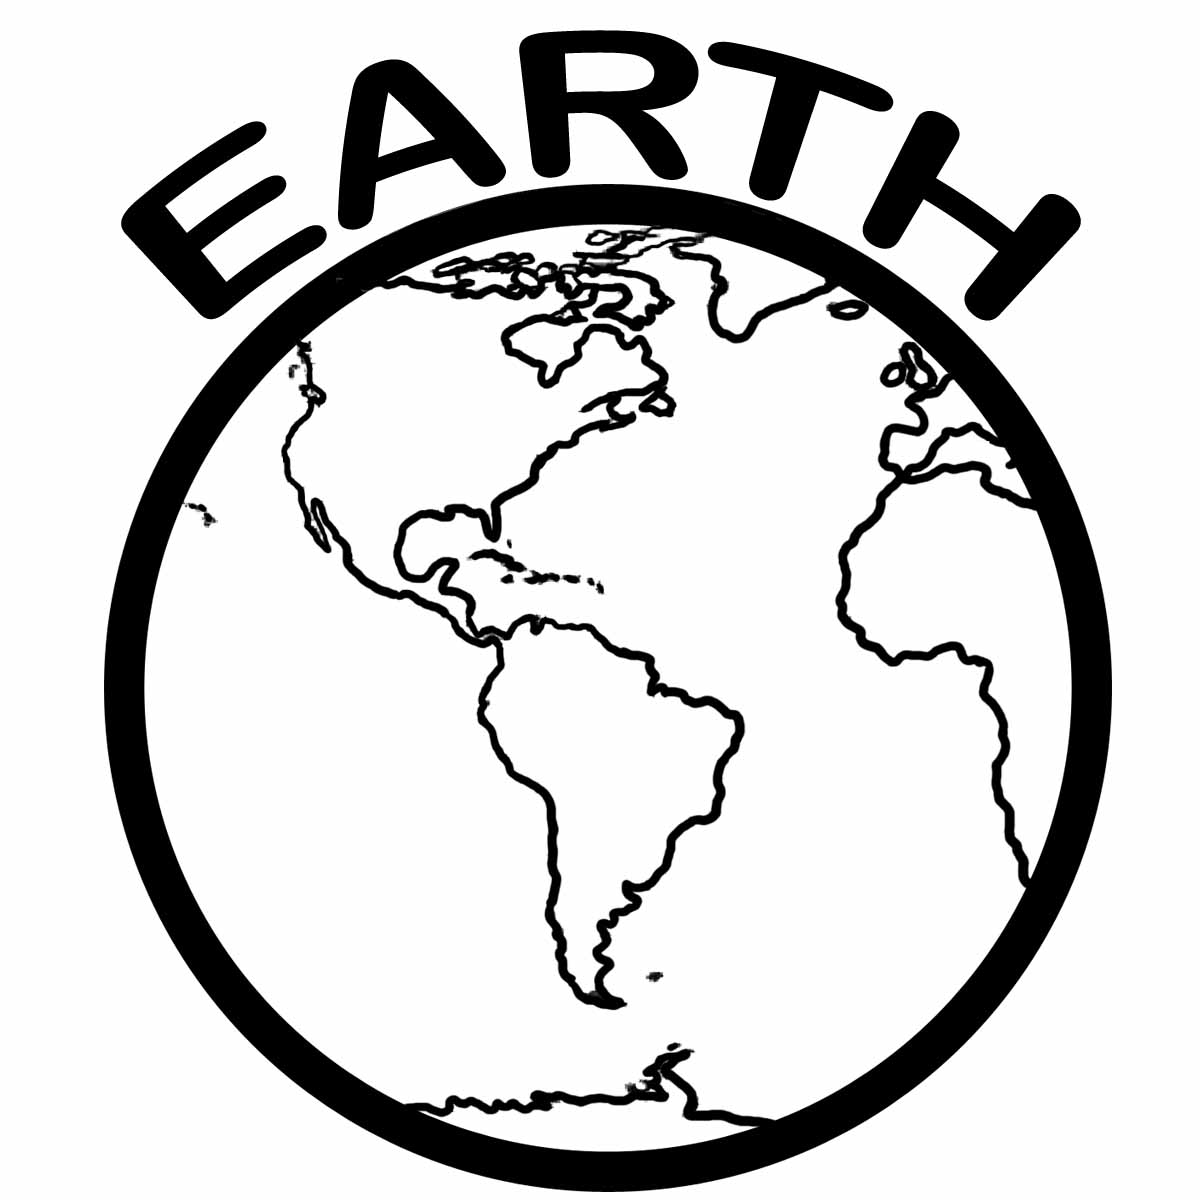 Earth Clip Art Free - Clipart library